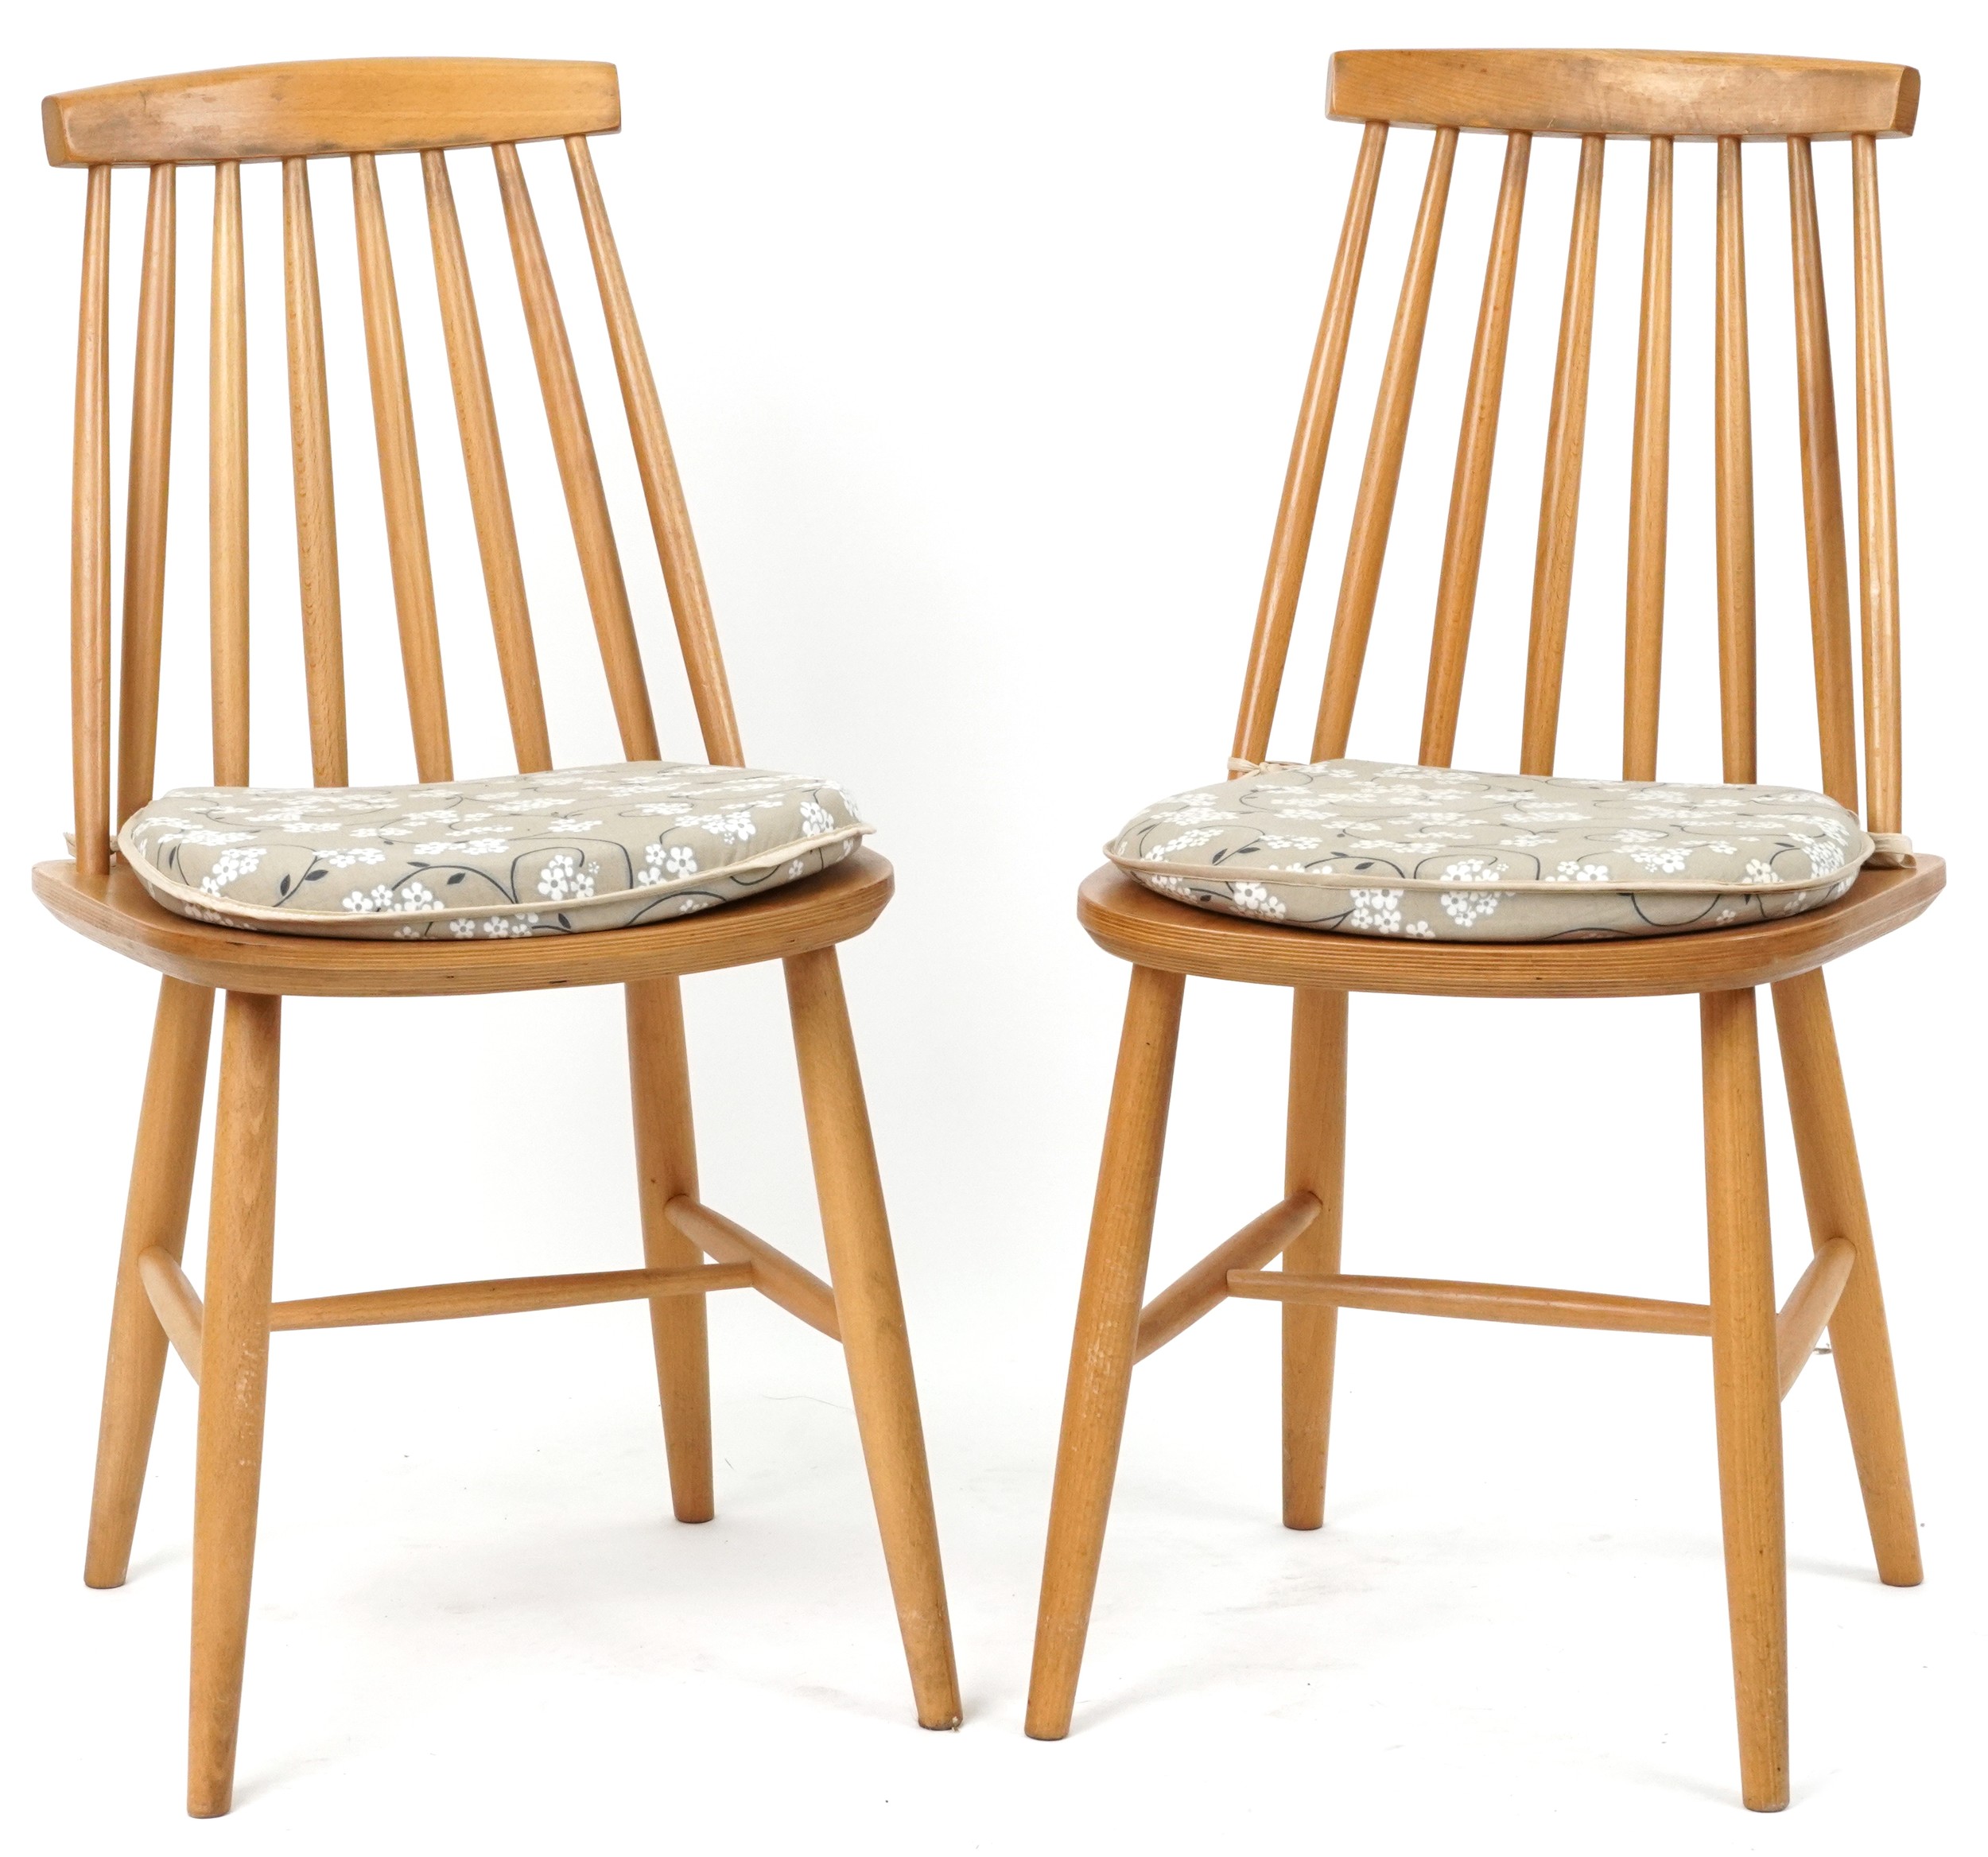 Ercol style lightwood drop end dining table with two stick back chairs, the table 74cm H x 55cm W - Image 6 of 9